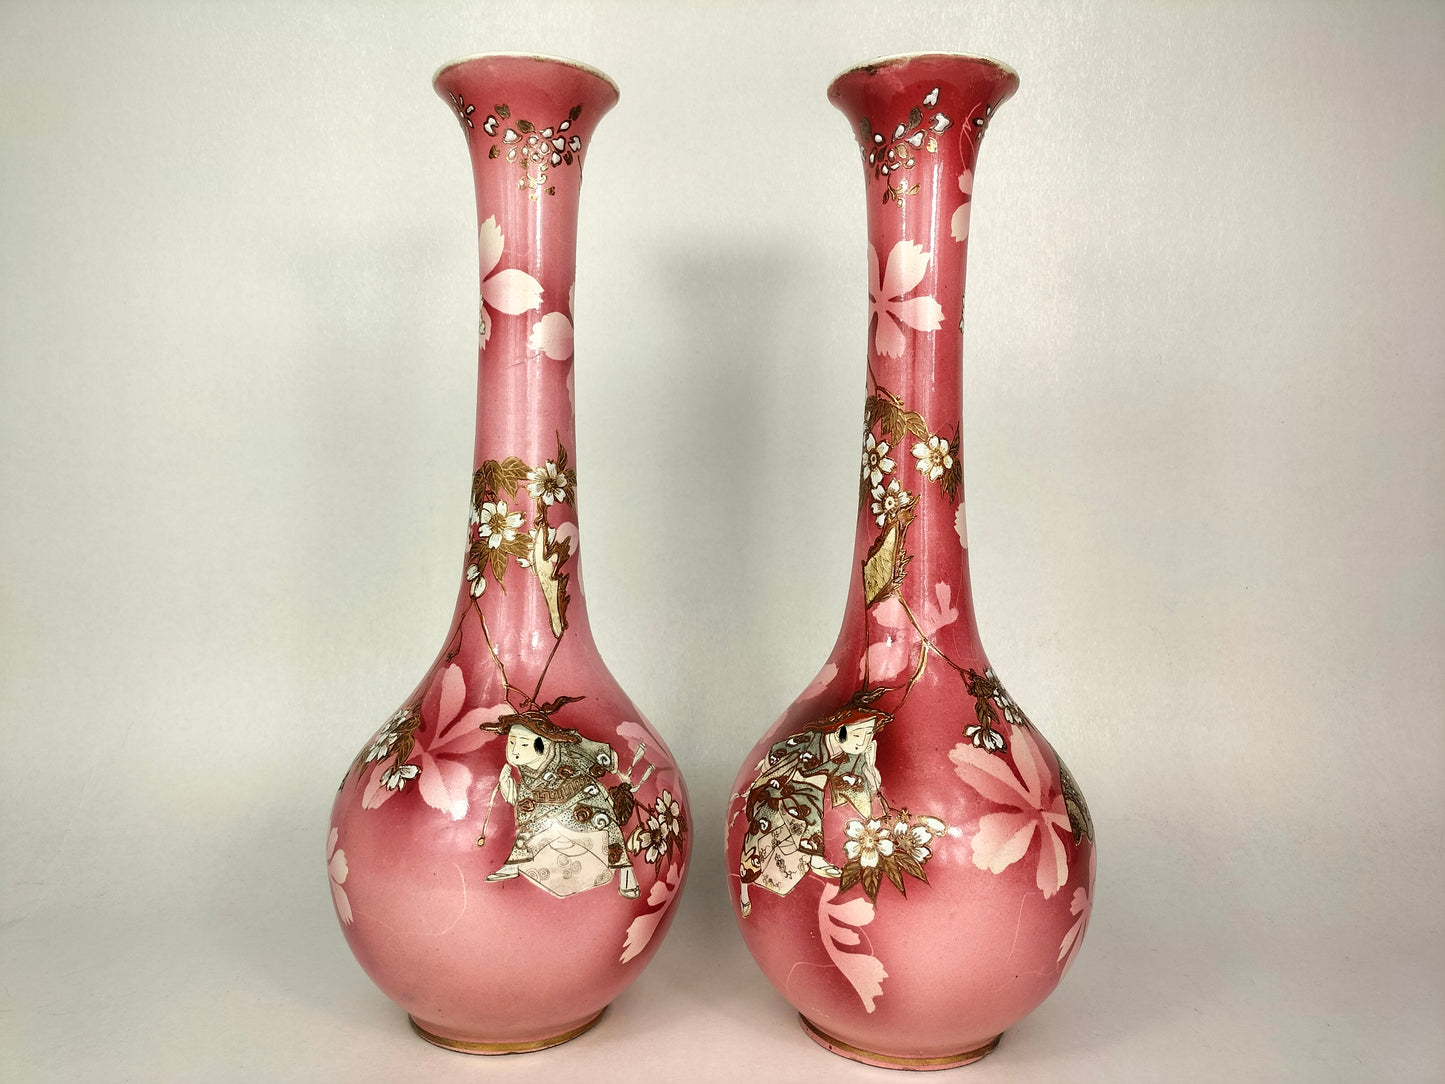 Pair of large antique Japanese satsuma vases decorated with figures // Early 20th century - Meiji period